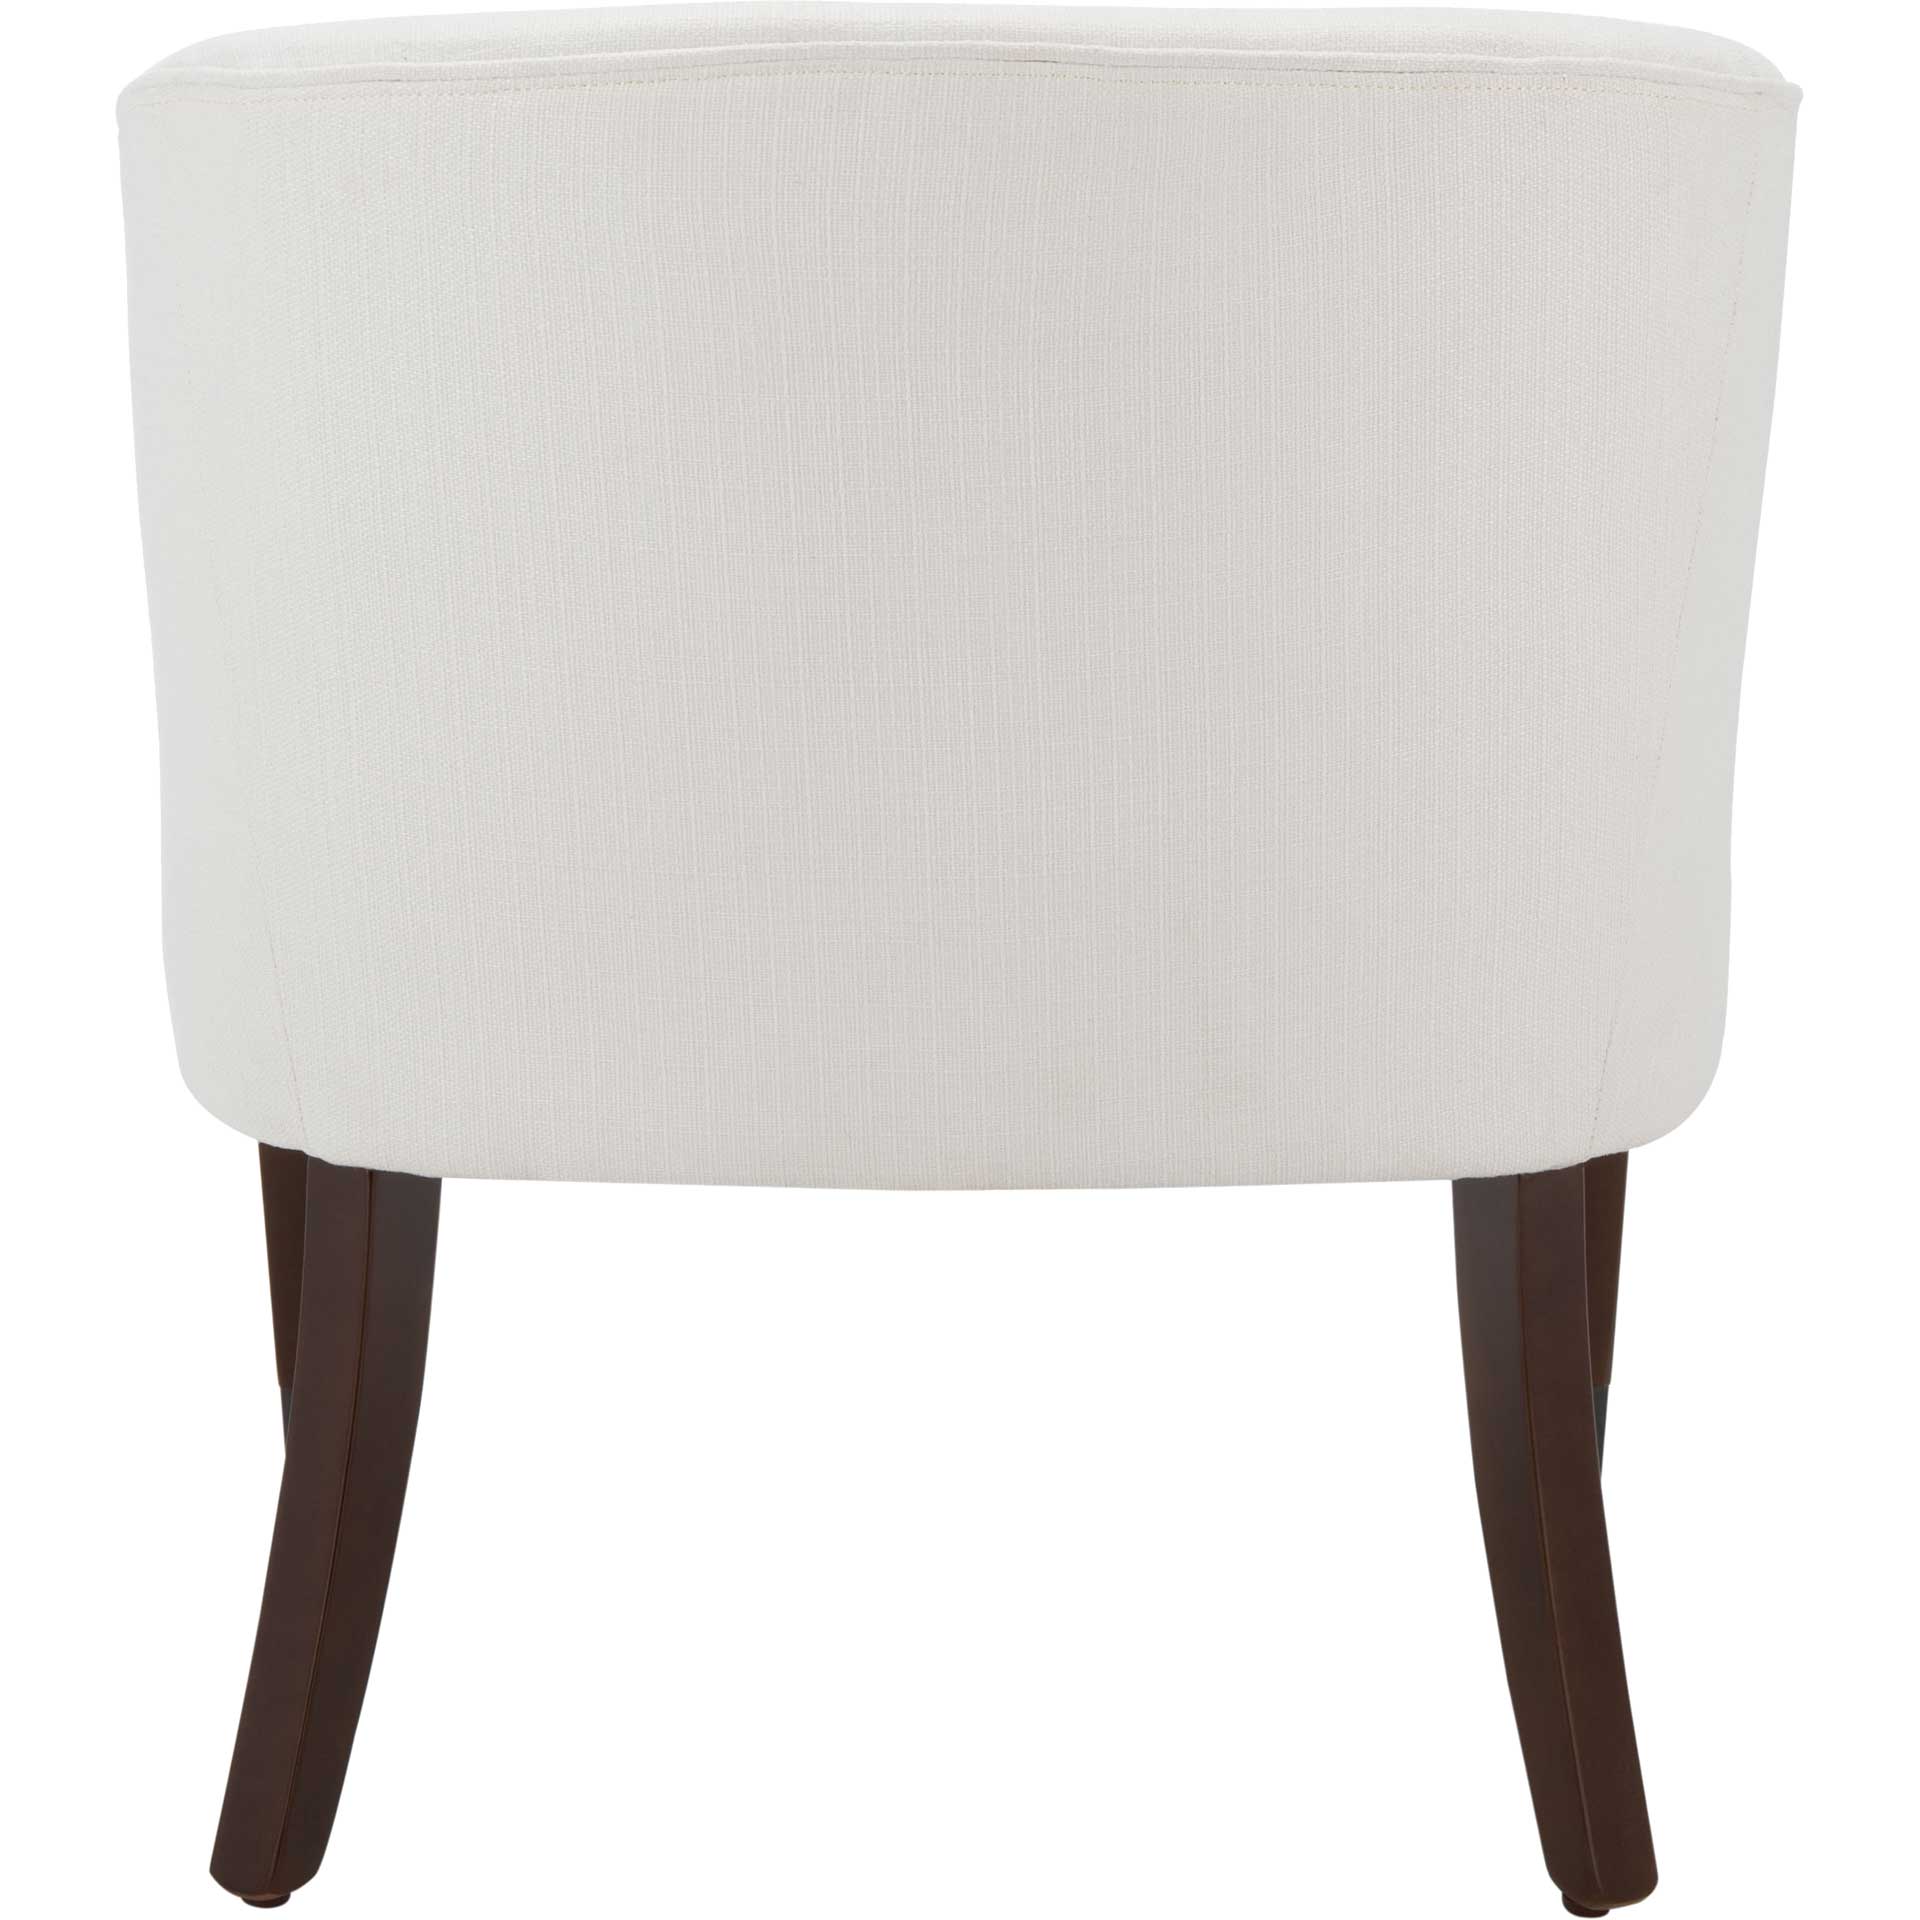 Ibaad Accent Chair White